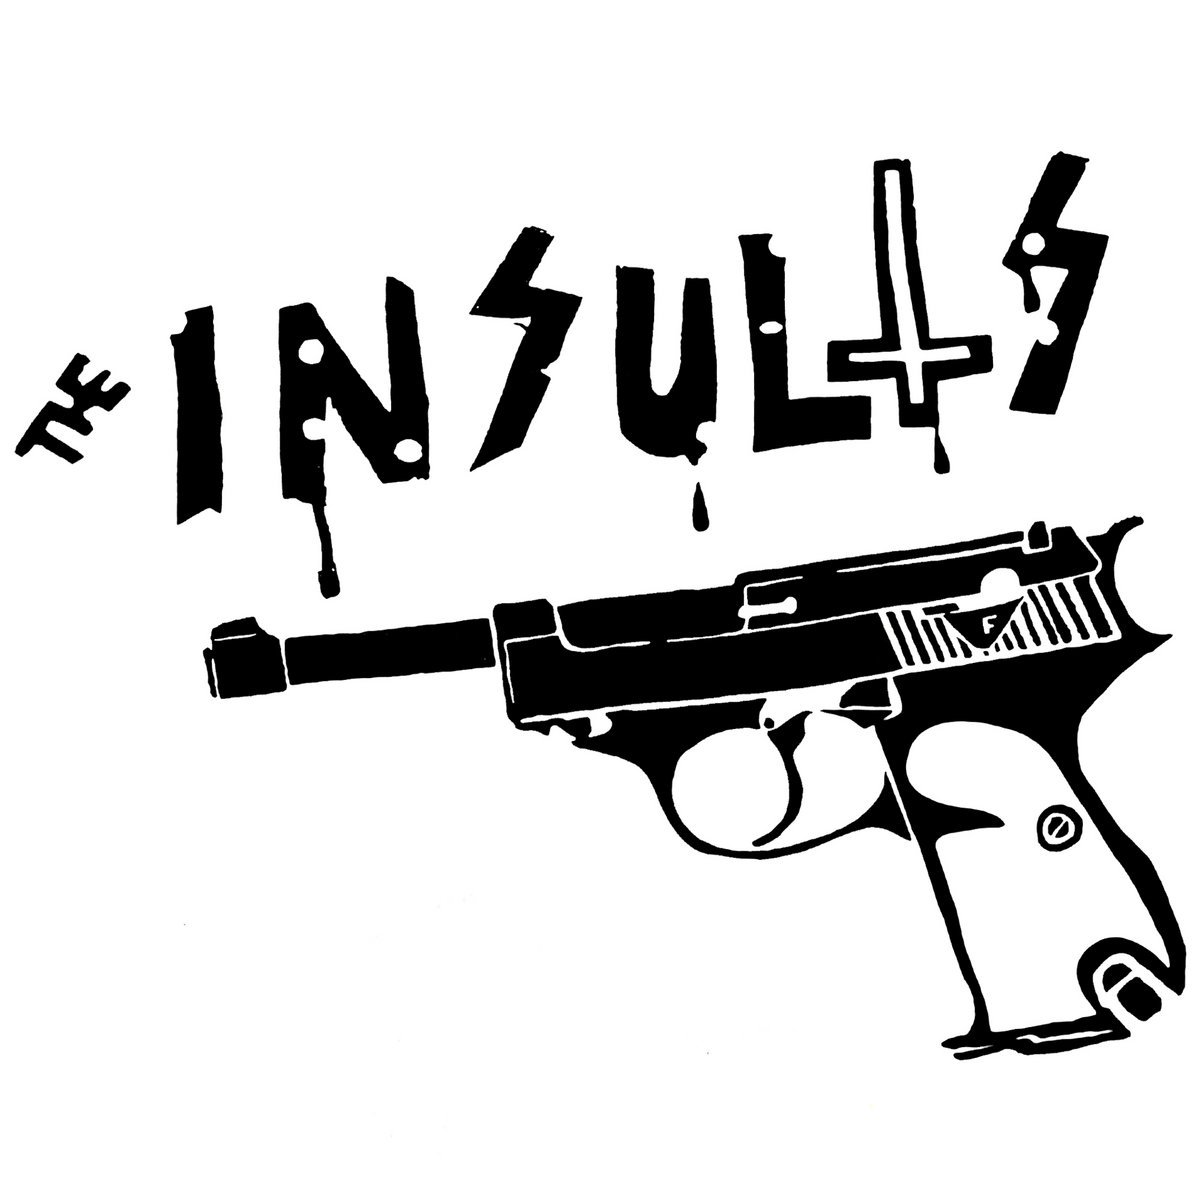 Image of THE INSULTS - s/t (1980) LP